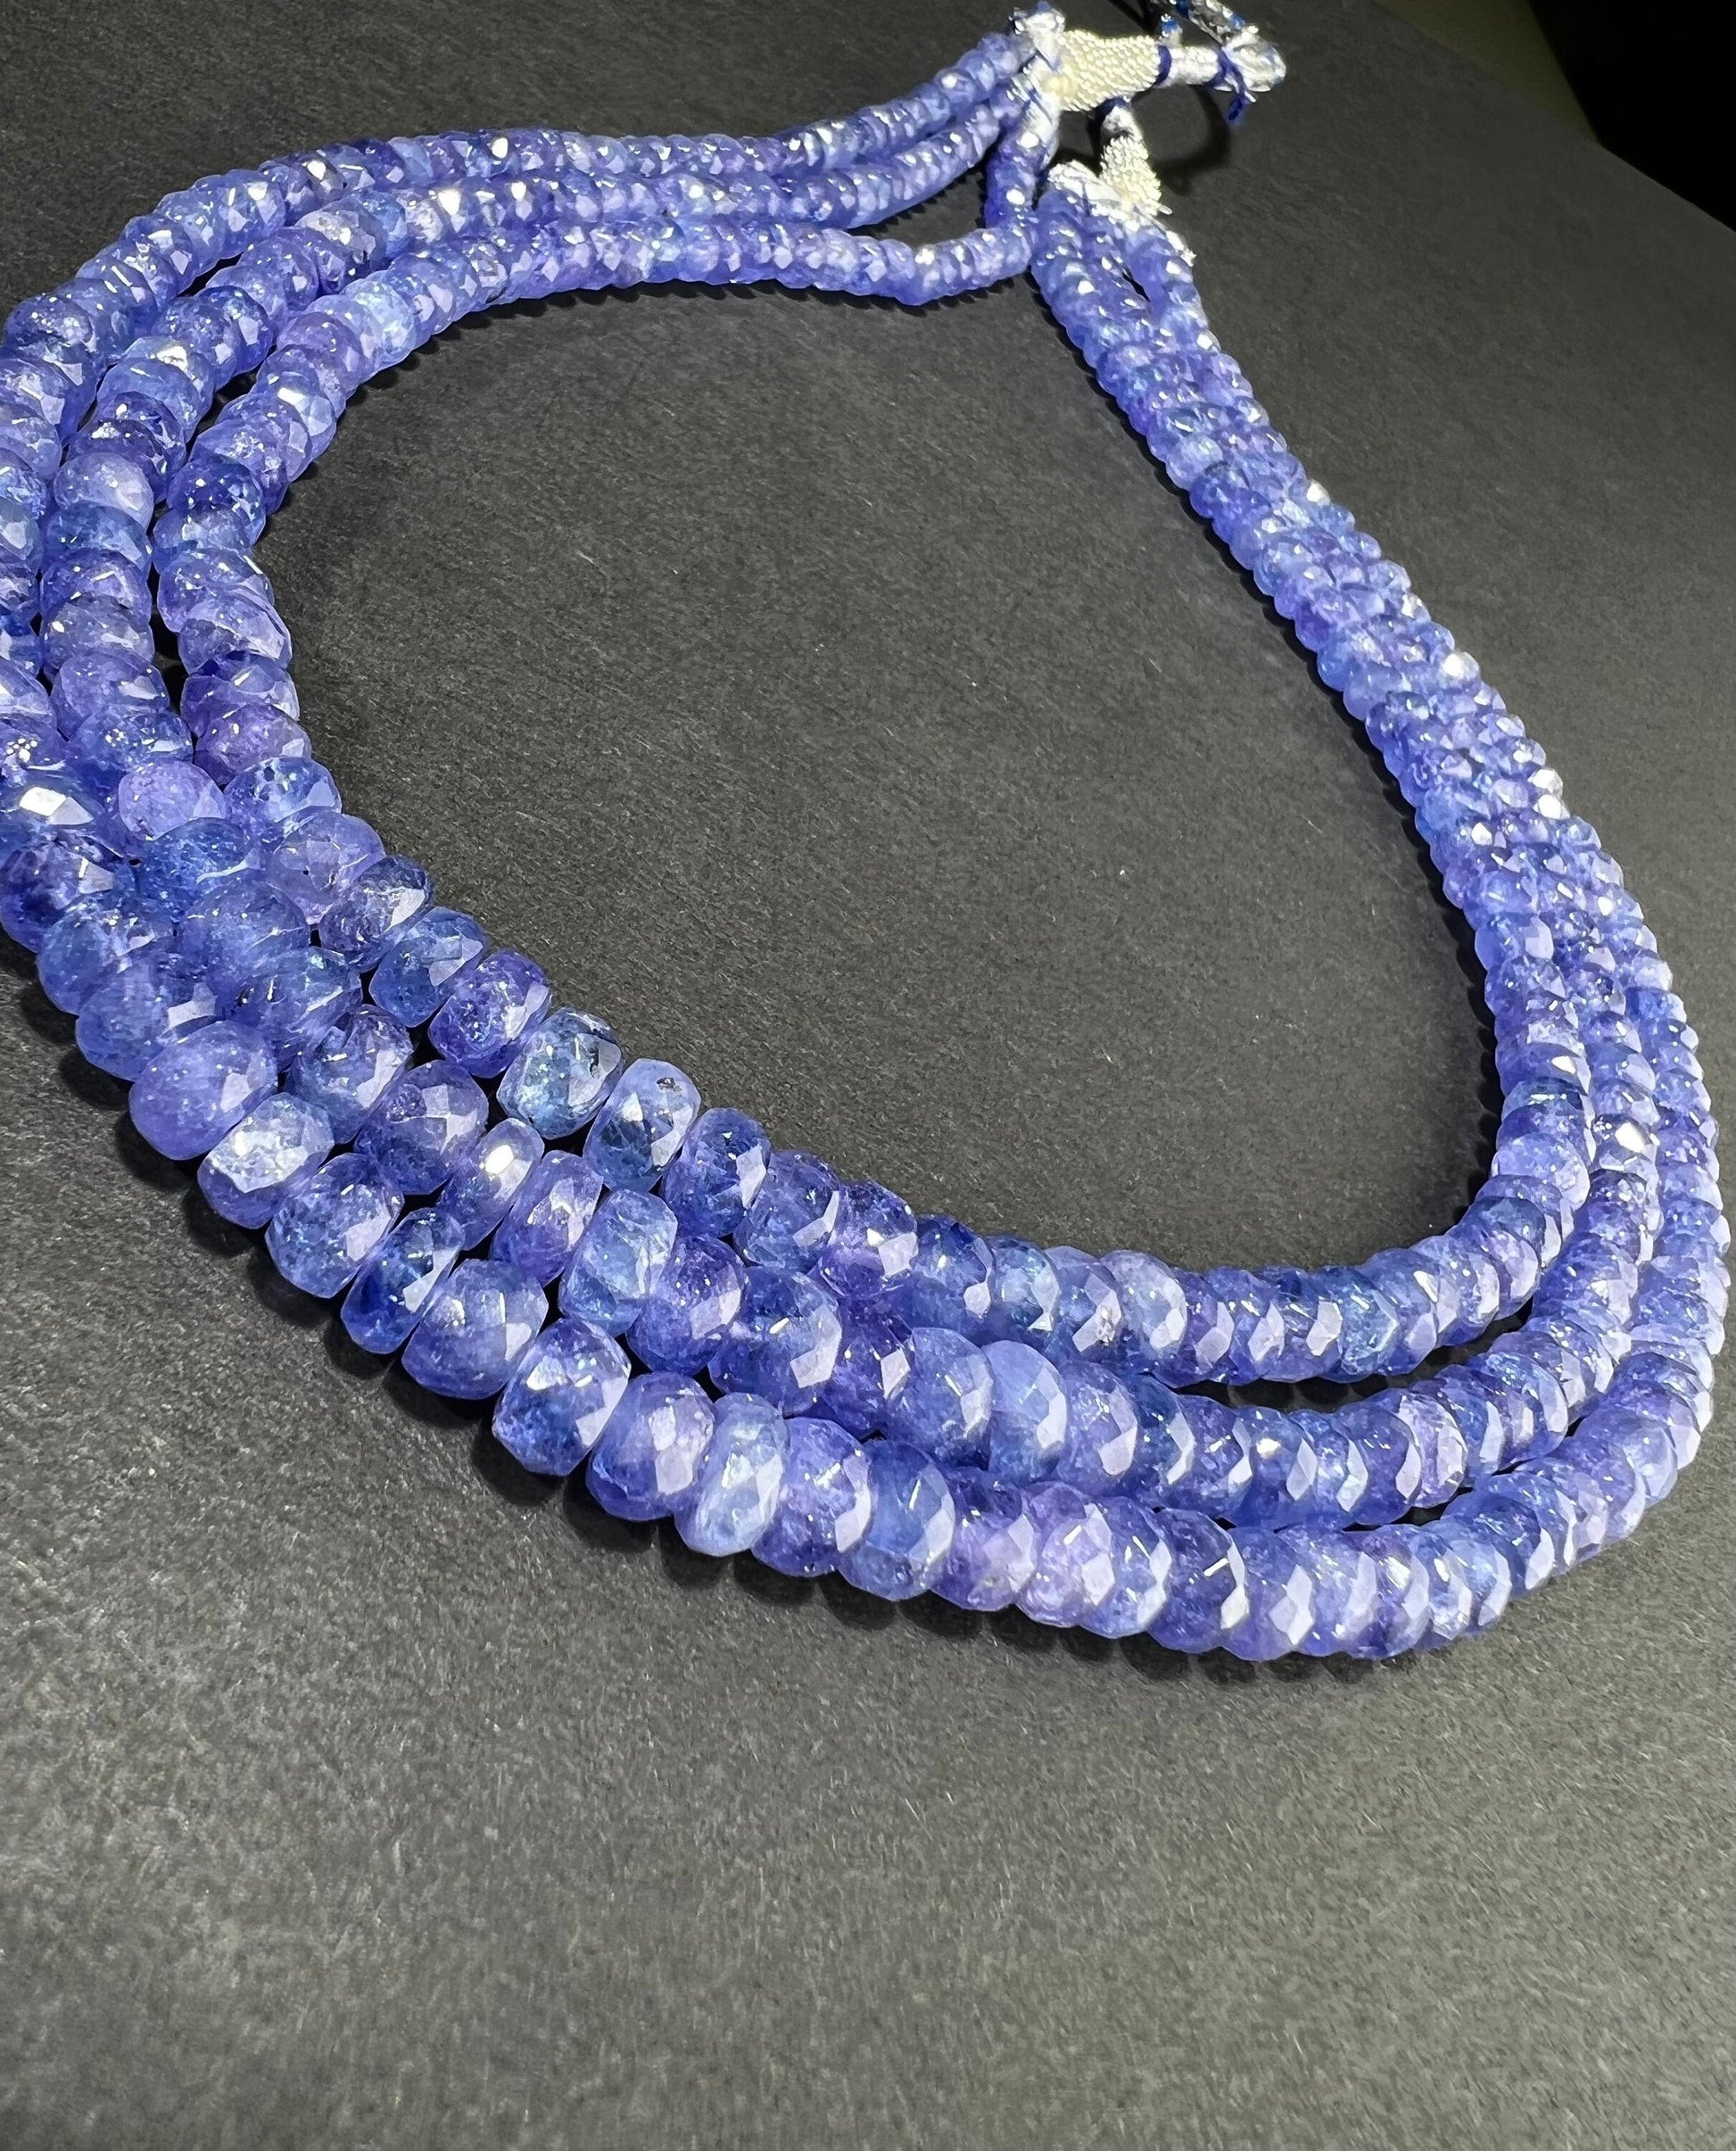 3 line Natural Tanzanite Faceted 5-6mm Large Rondelle 16&quot; Plus Adjustable Long Thread Necklace. AAA Quality. Beautiful Gift, 330 Cts,AAA+